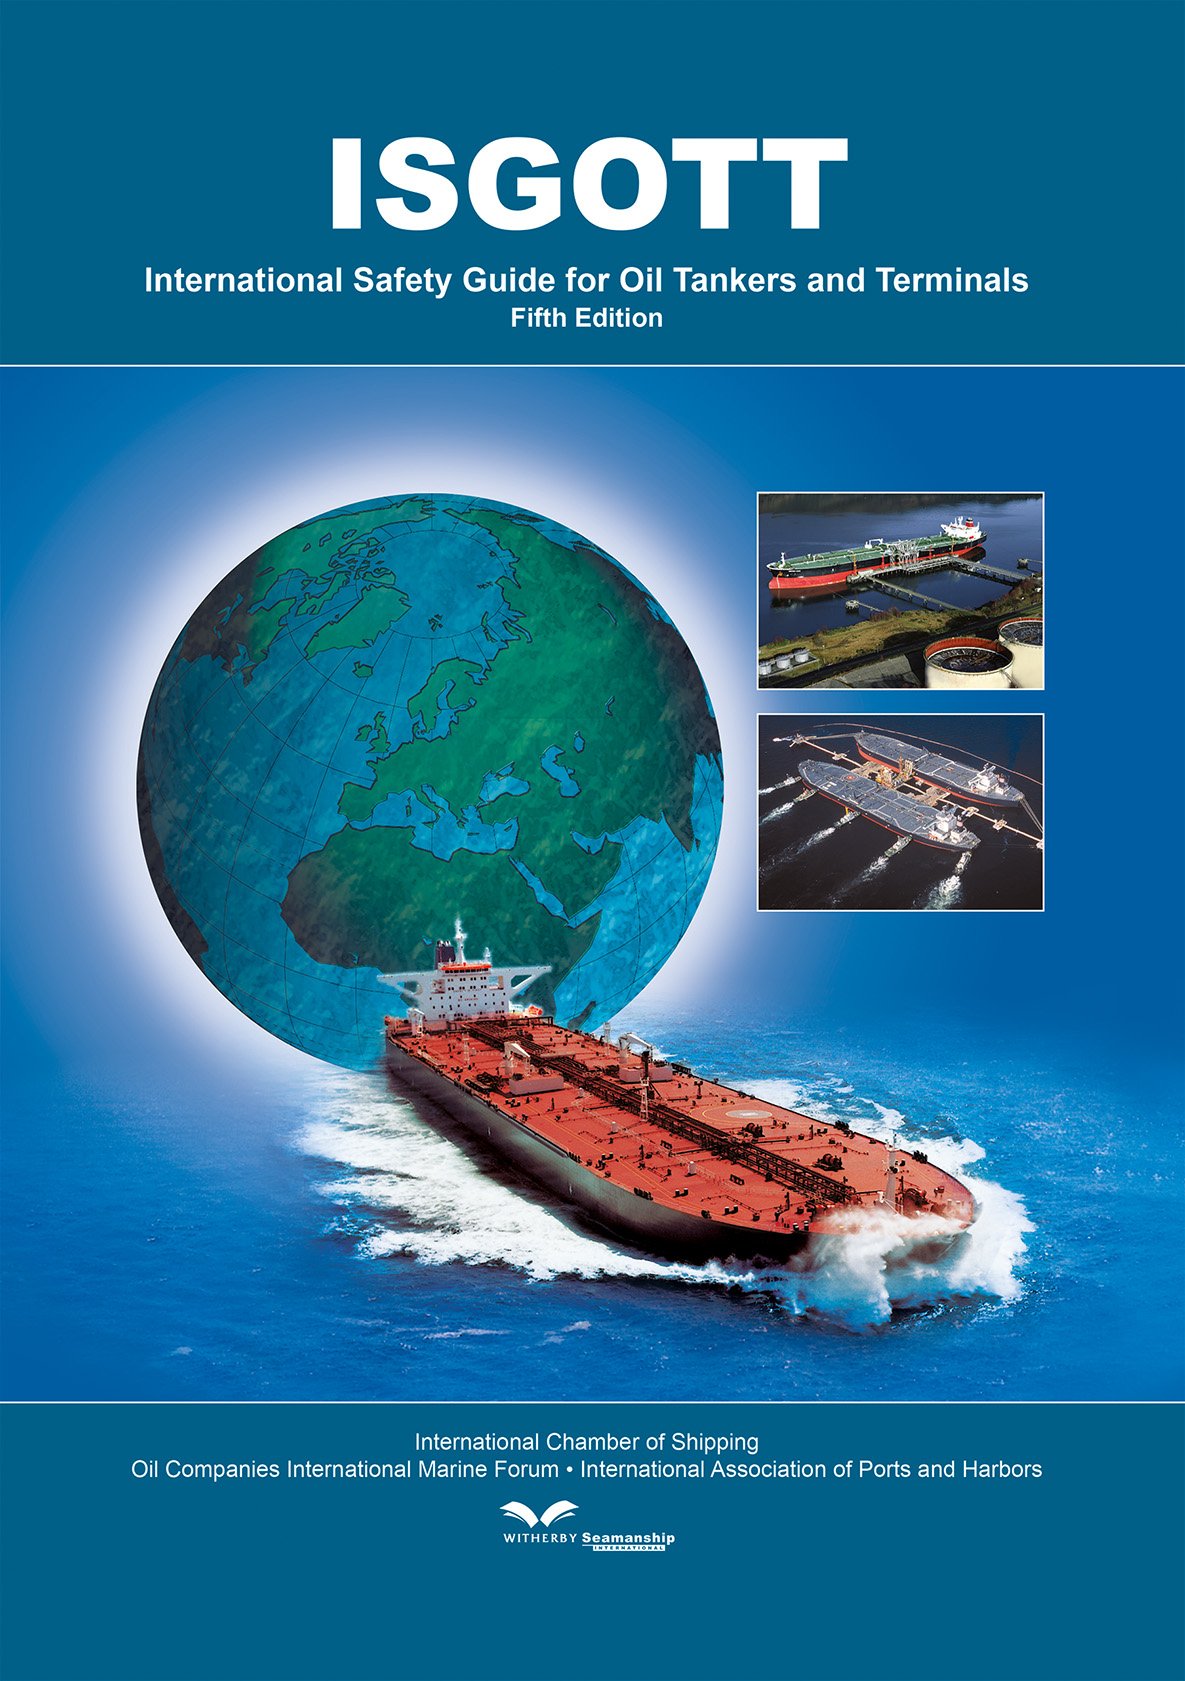 International Safety Guide for Oil Tankers and Terminals, 5th Edition